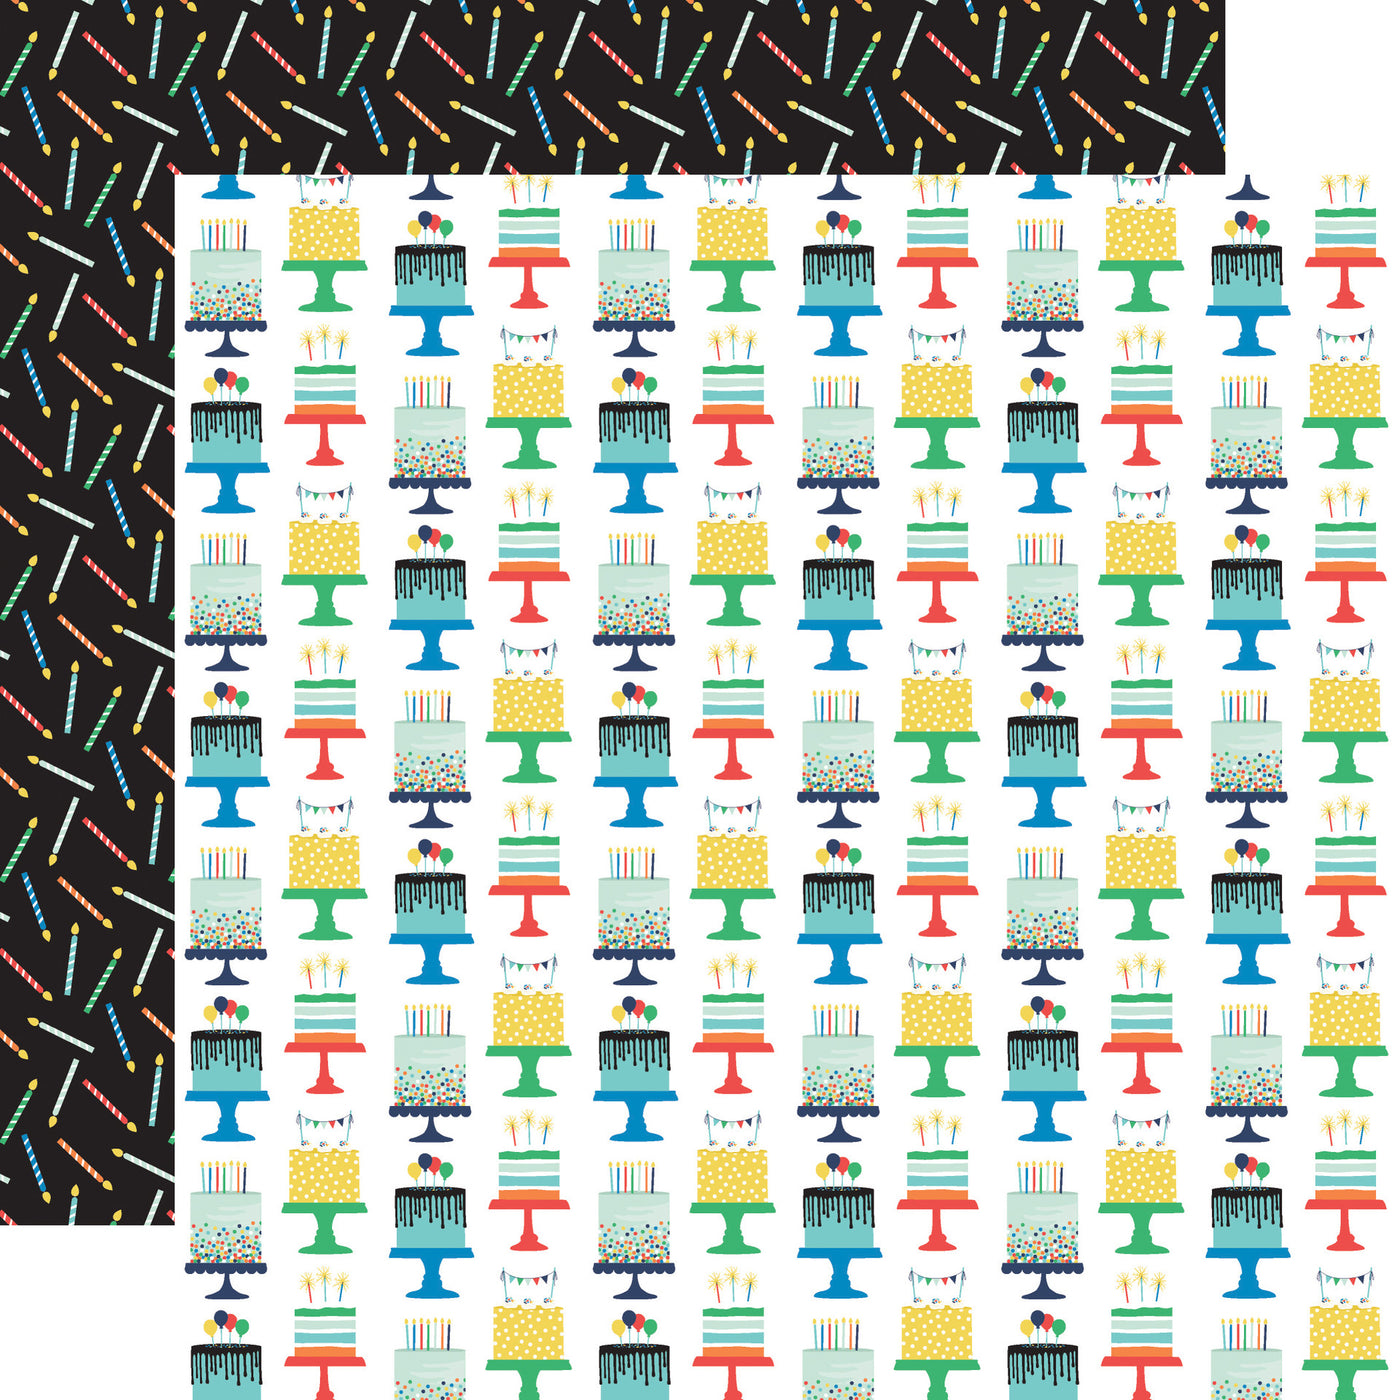 12x12 double-sided multi-colored patterned paper - (colorful bright birthday cakes on a white background, primary colored birthday candles on a black background reverse) - from Echo Park Paper.